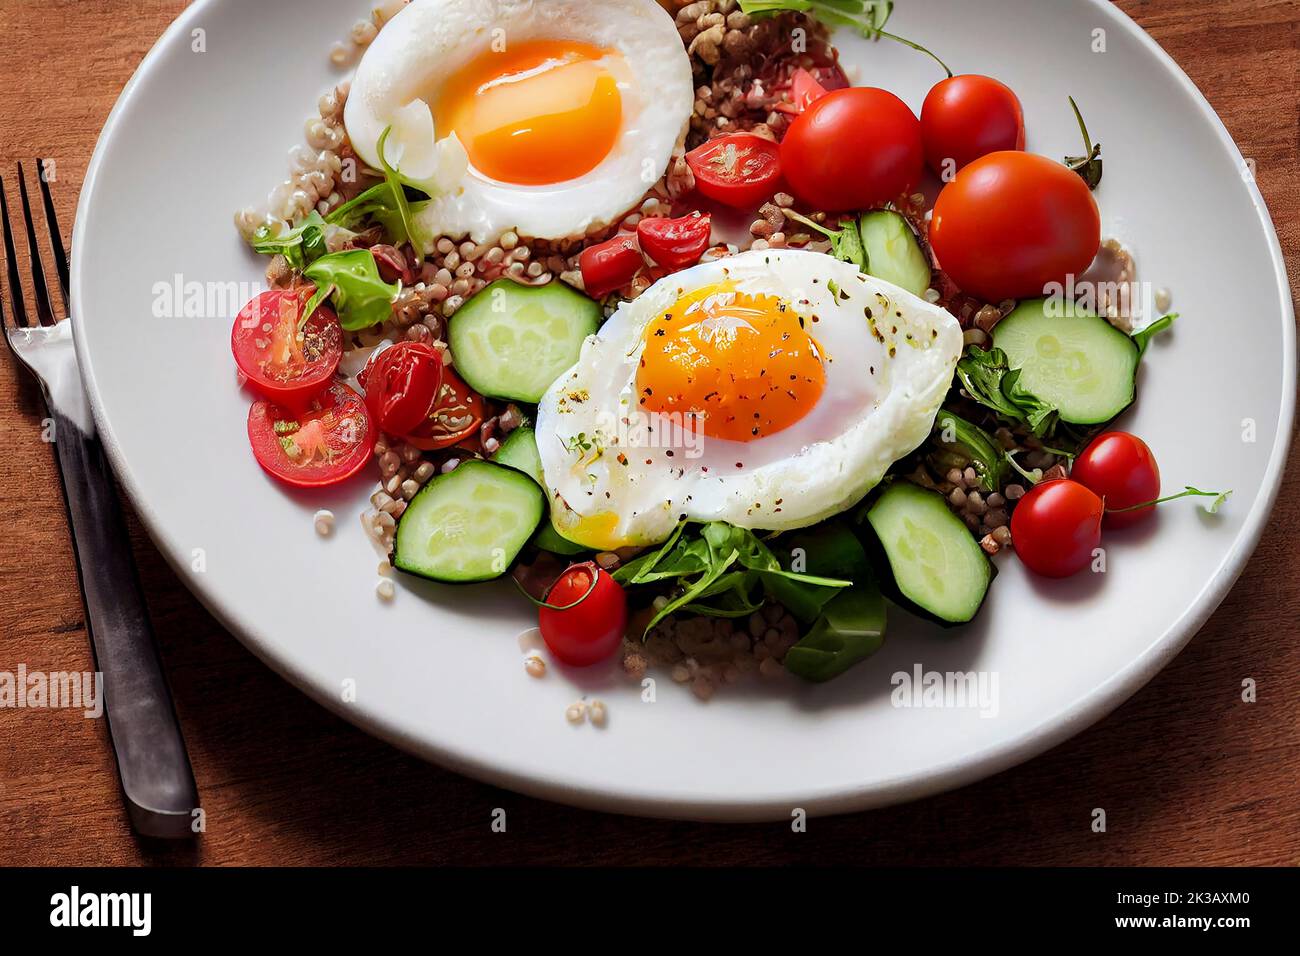 Fresh healthy light breakfast or lunch with poached egg, grains, fresh salad of cucumbers and cherry tomatoes, food photography and illustration Stock Photo